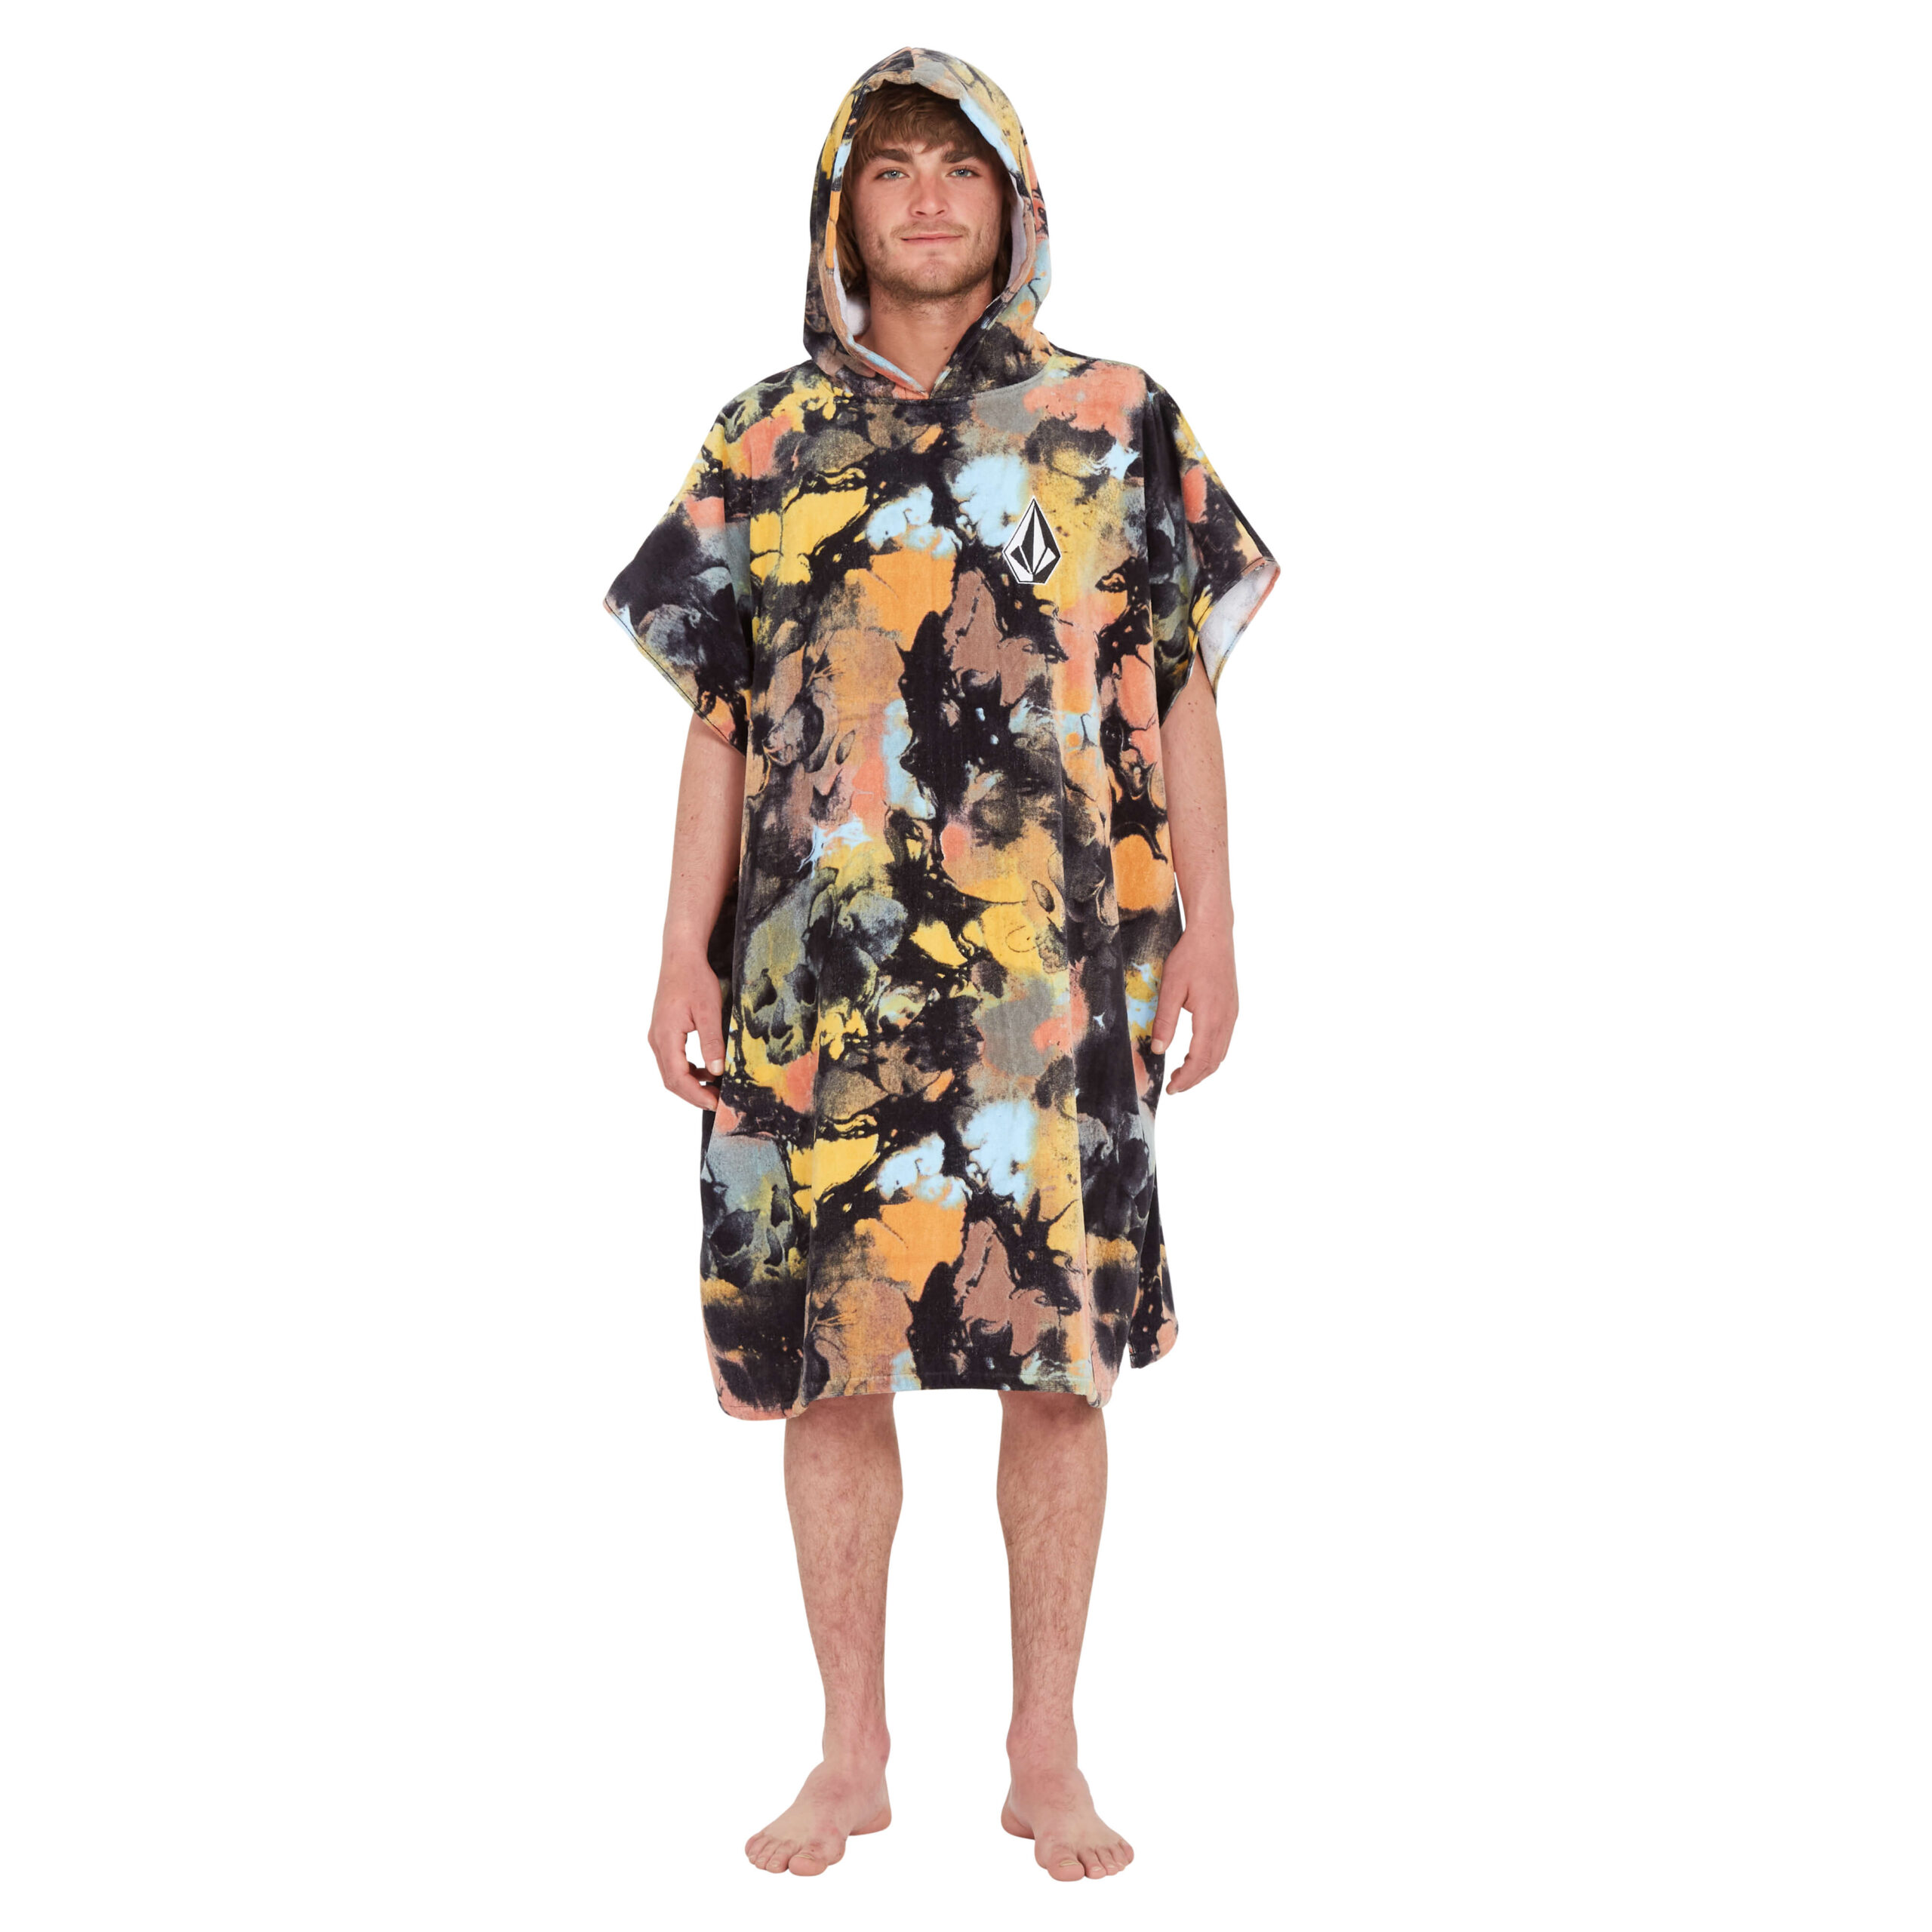 Poncho Volcom - ROOK CHANGING TOWEL - Dawn Yellow -D6712203 (1)